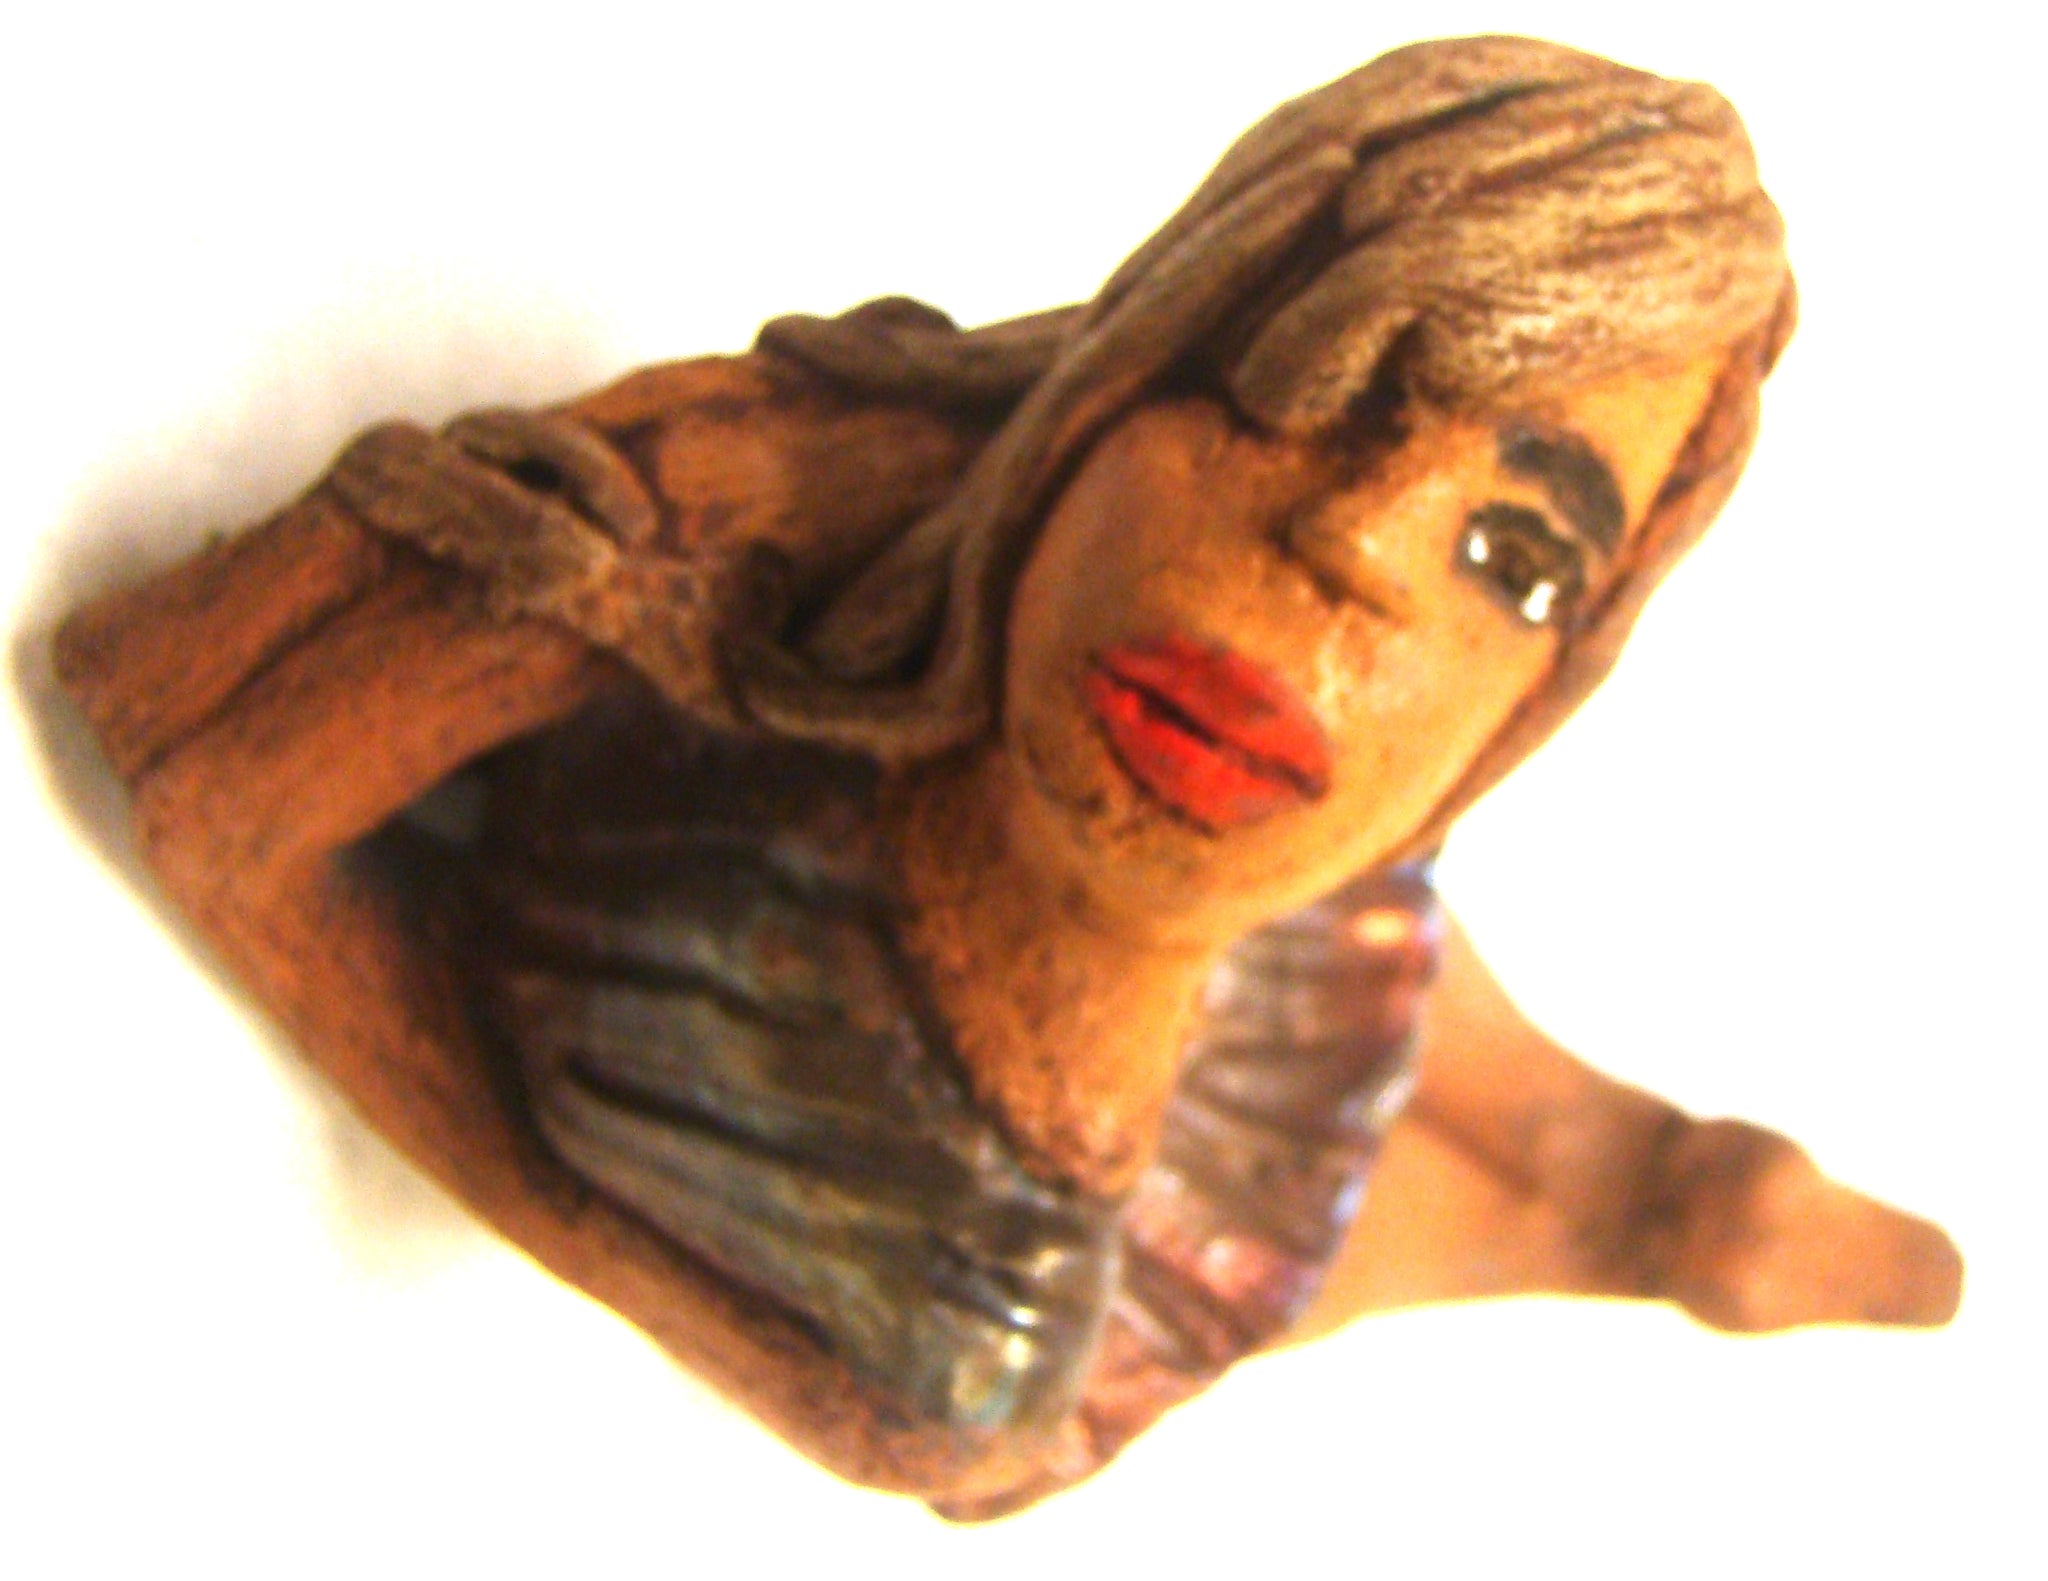      Juanita  stands 4" x 3" x 7" and weighs 1 lb.     She has a lovely honey brown complexion.     Juanita has a copper iridescent  dress.     Her long loving arms rest underneath her face as she  caresses her brown clay hair.     Juanita will definitely get your guest attention and create conversation.